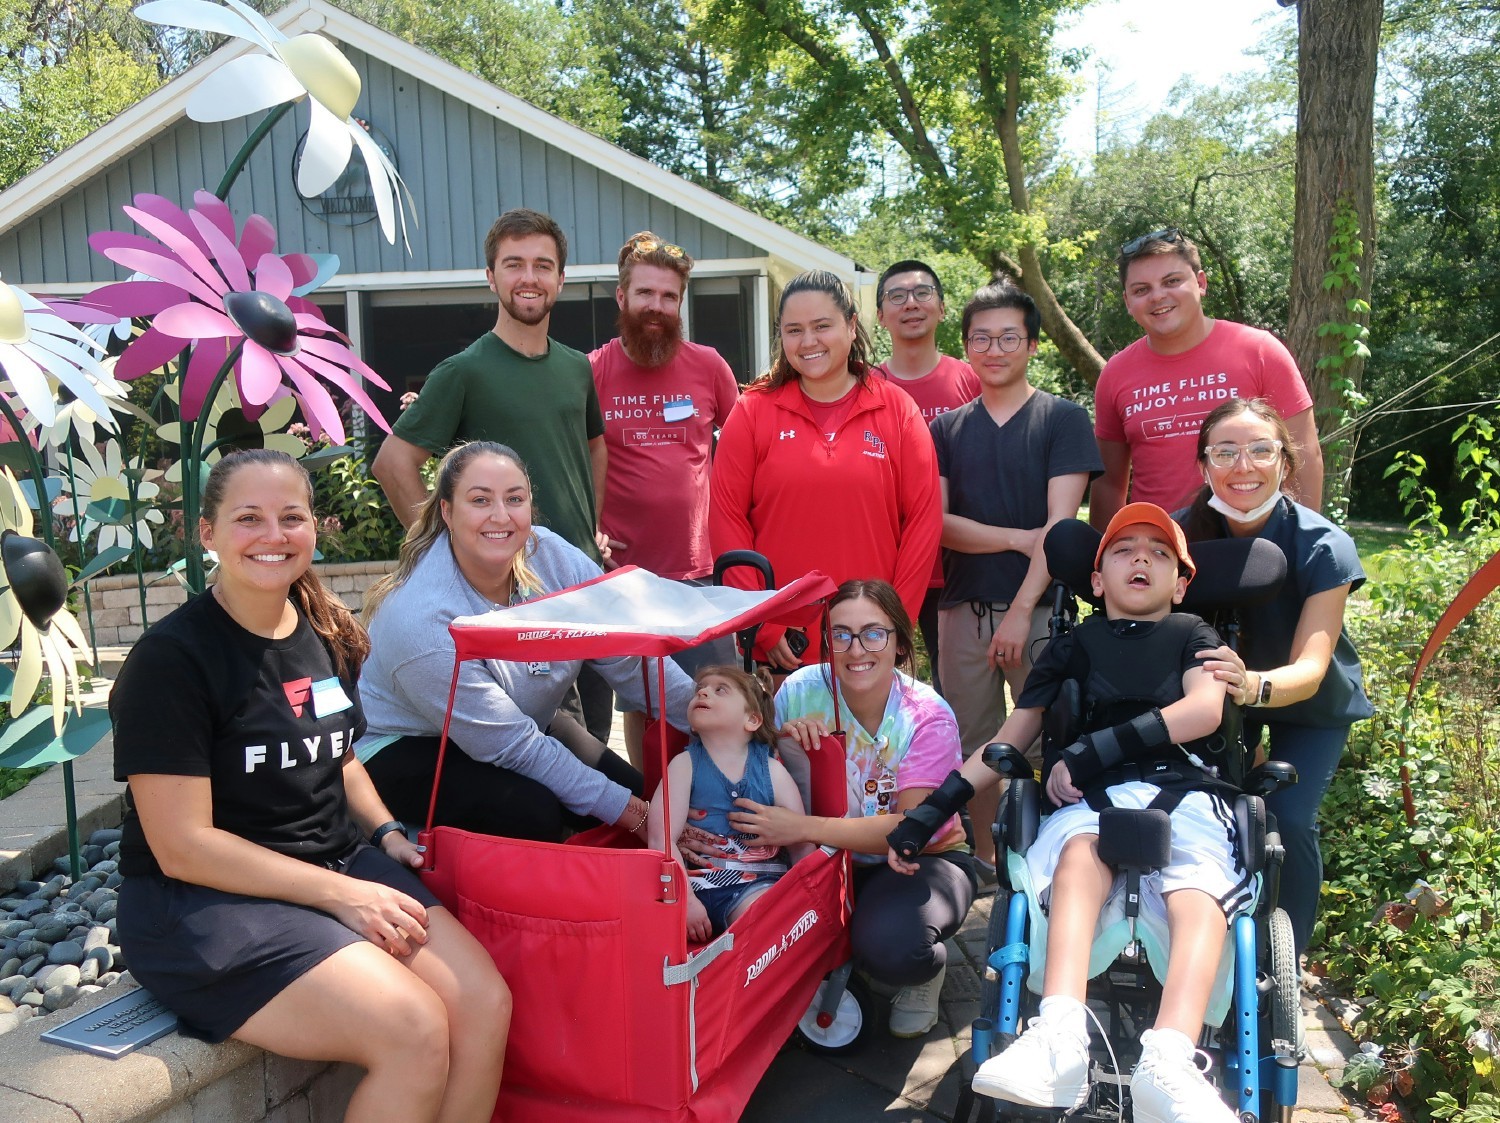 Radio Flyer gives back at a Smile Day with longtime partner Almost Home Kids, organized by the Smile Squad Committee.